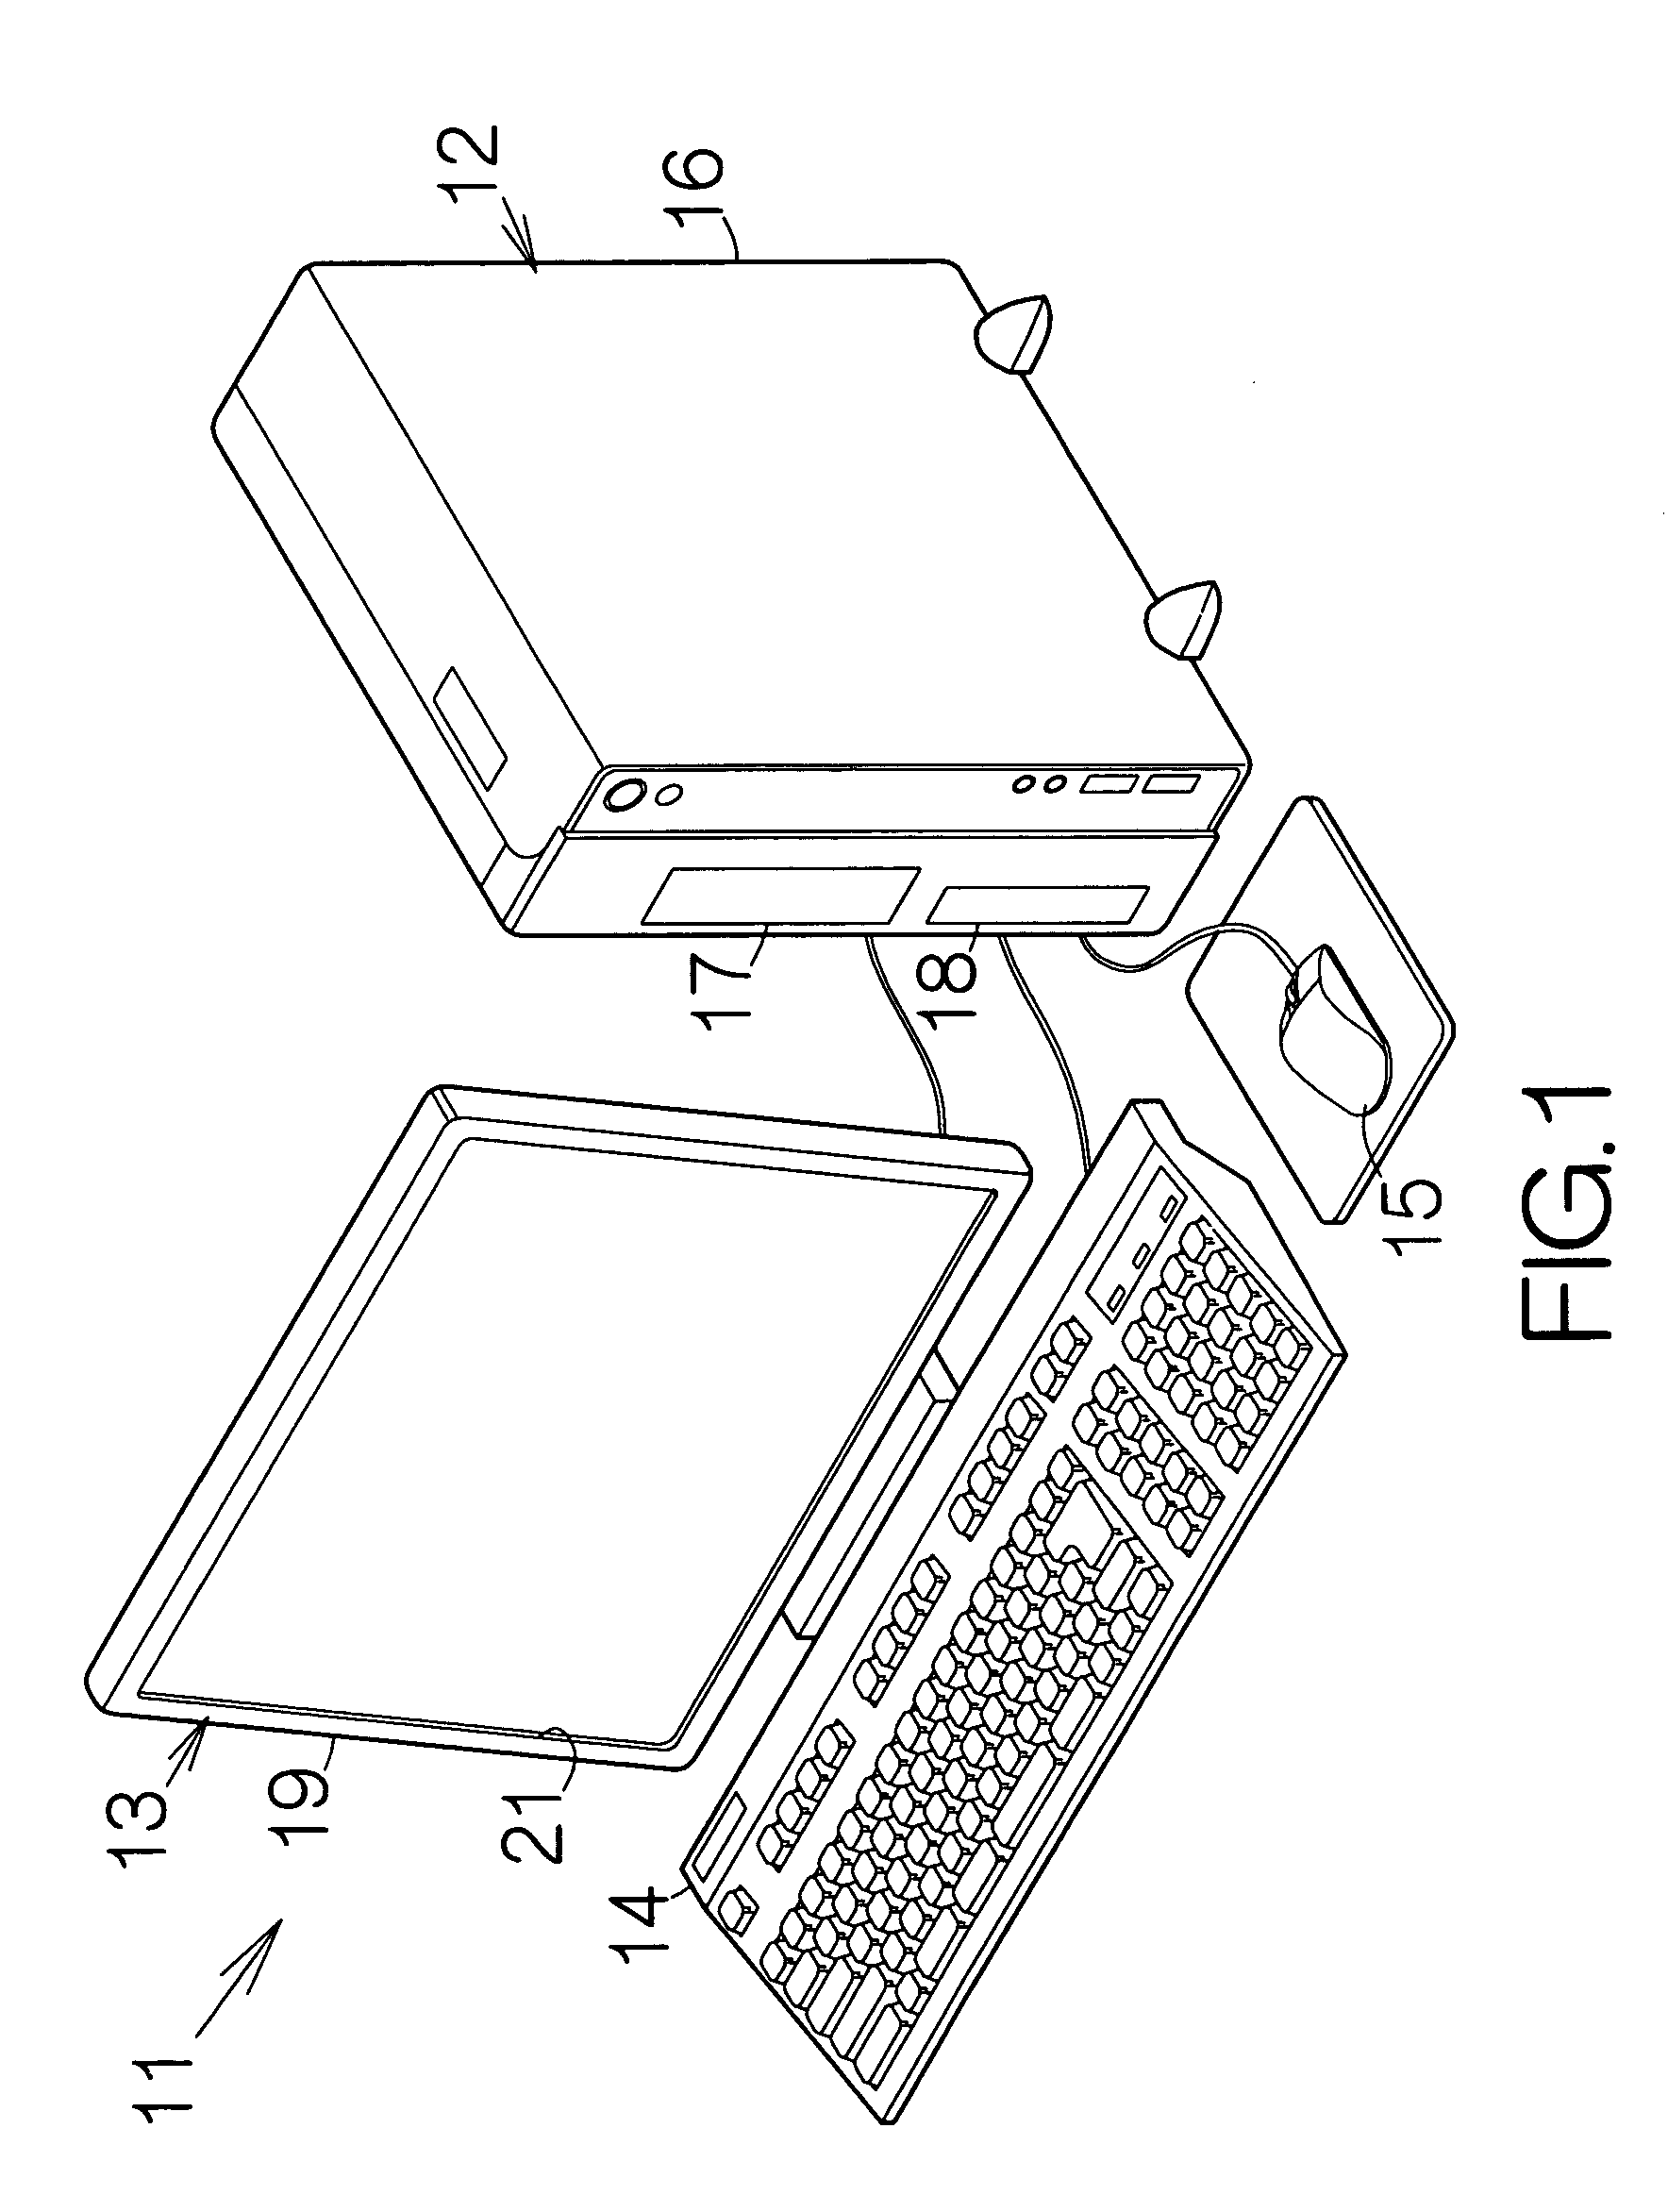 Vent grid and electronic apparatus employing the same